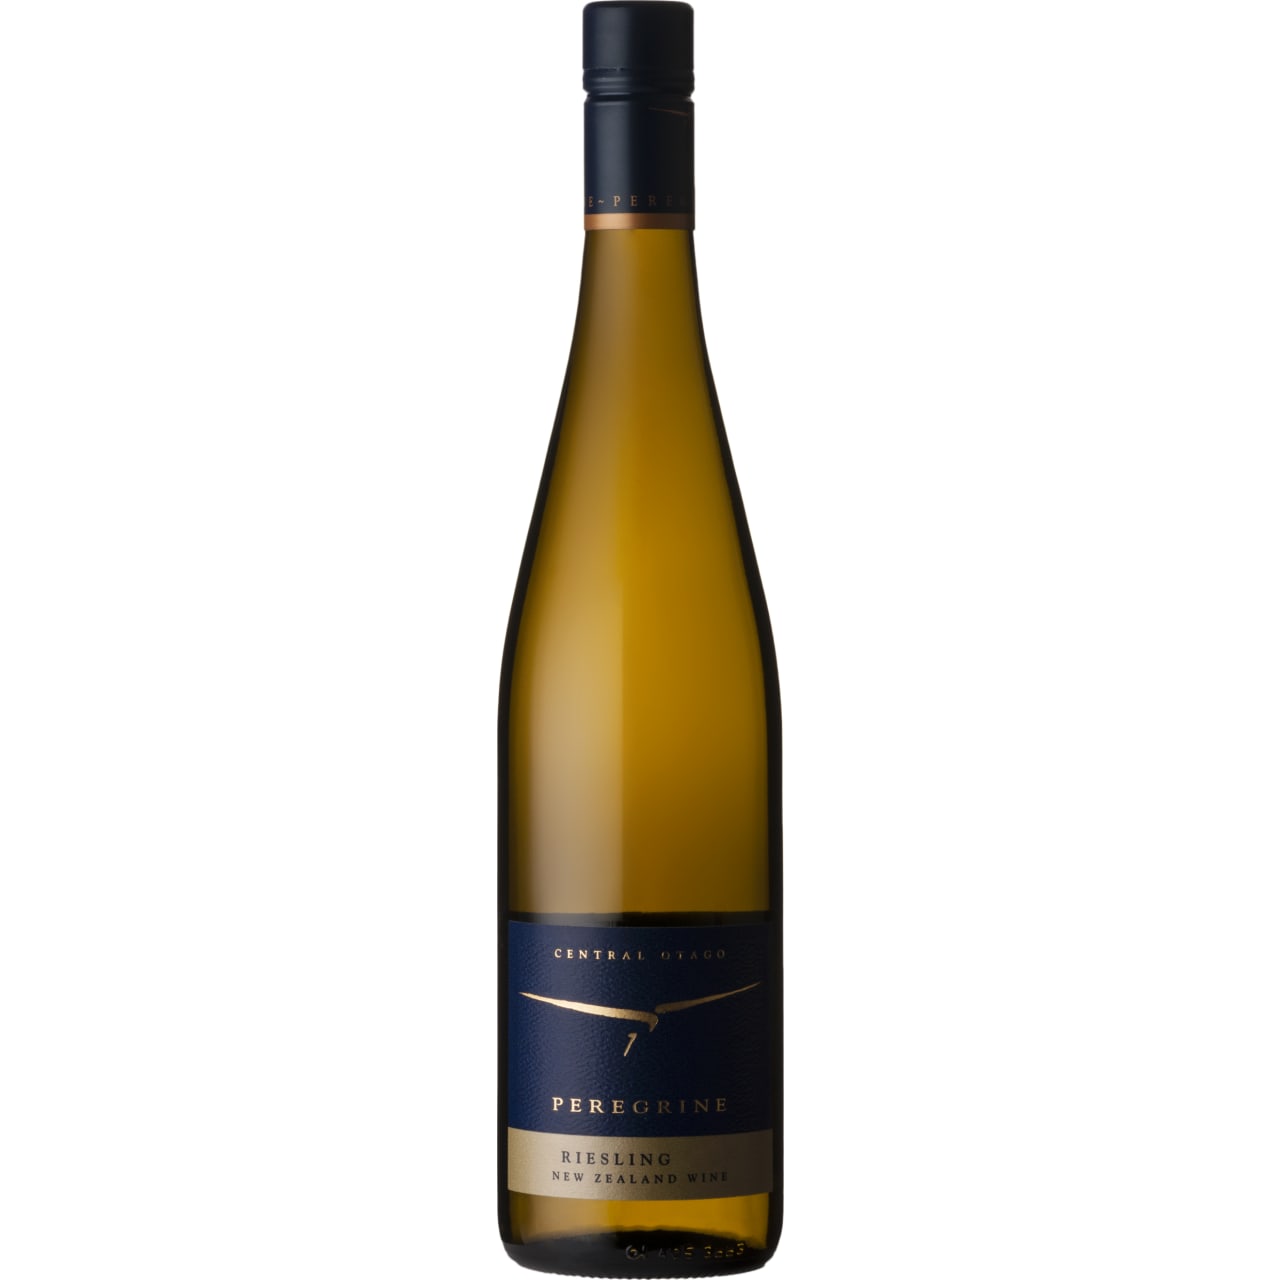 A bright and precise Riesling, dry in style with delicate minerality and fresh acidity.